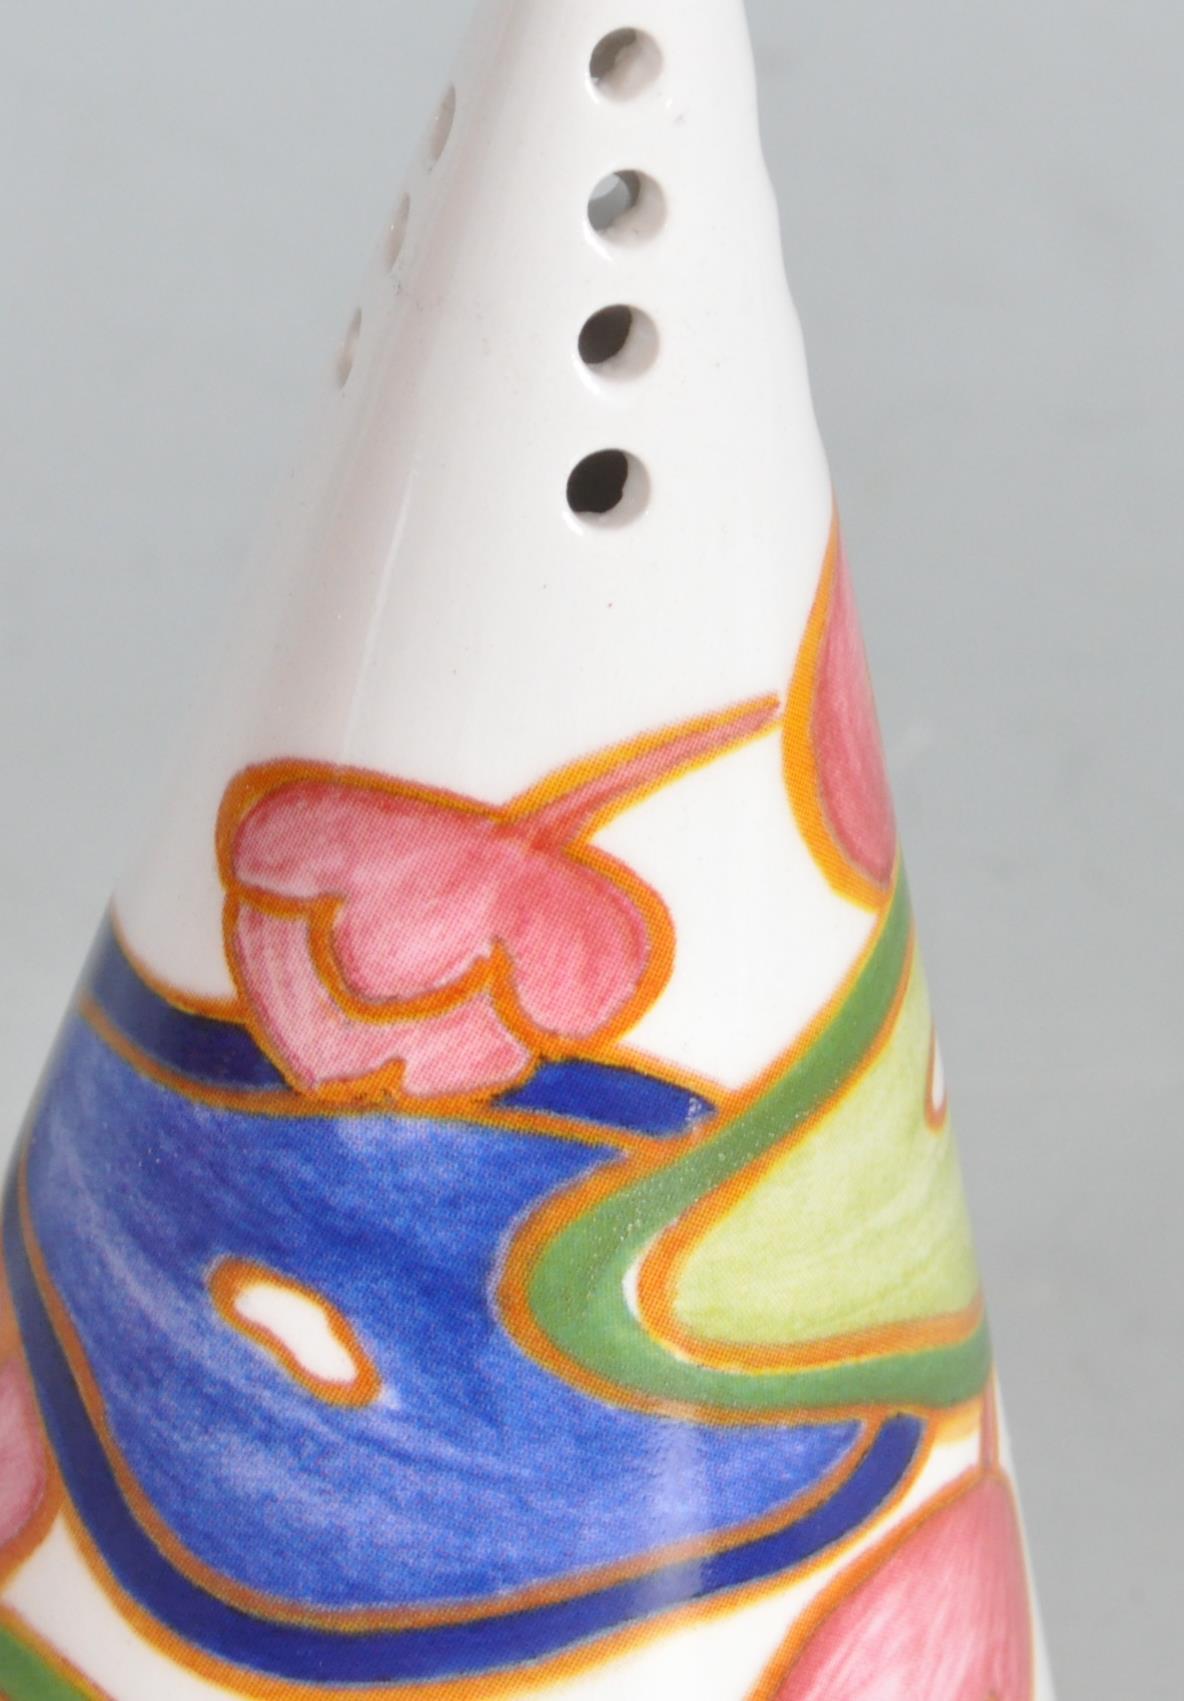 BLUE CHINTZ - SWEET SEDUCTION BY CLARICE CLIFF SUGAR SIFTER - Image 5 of 8